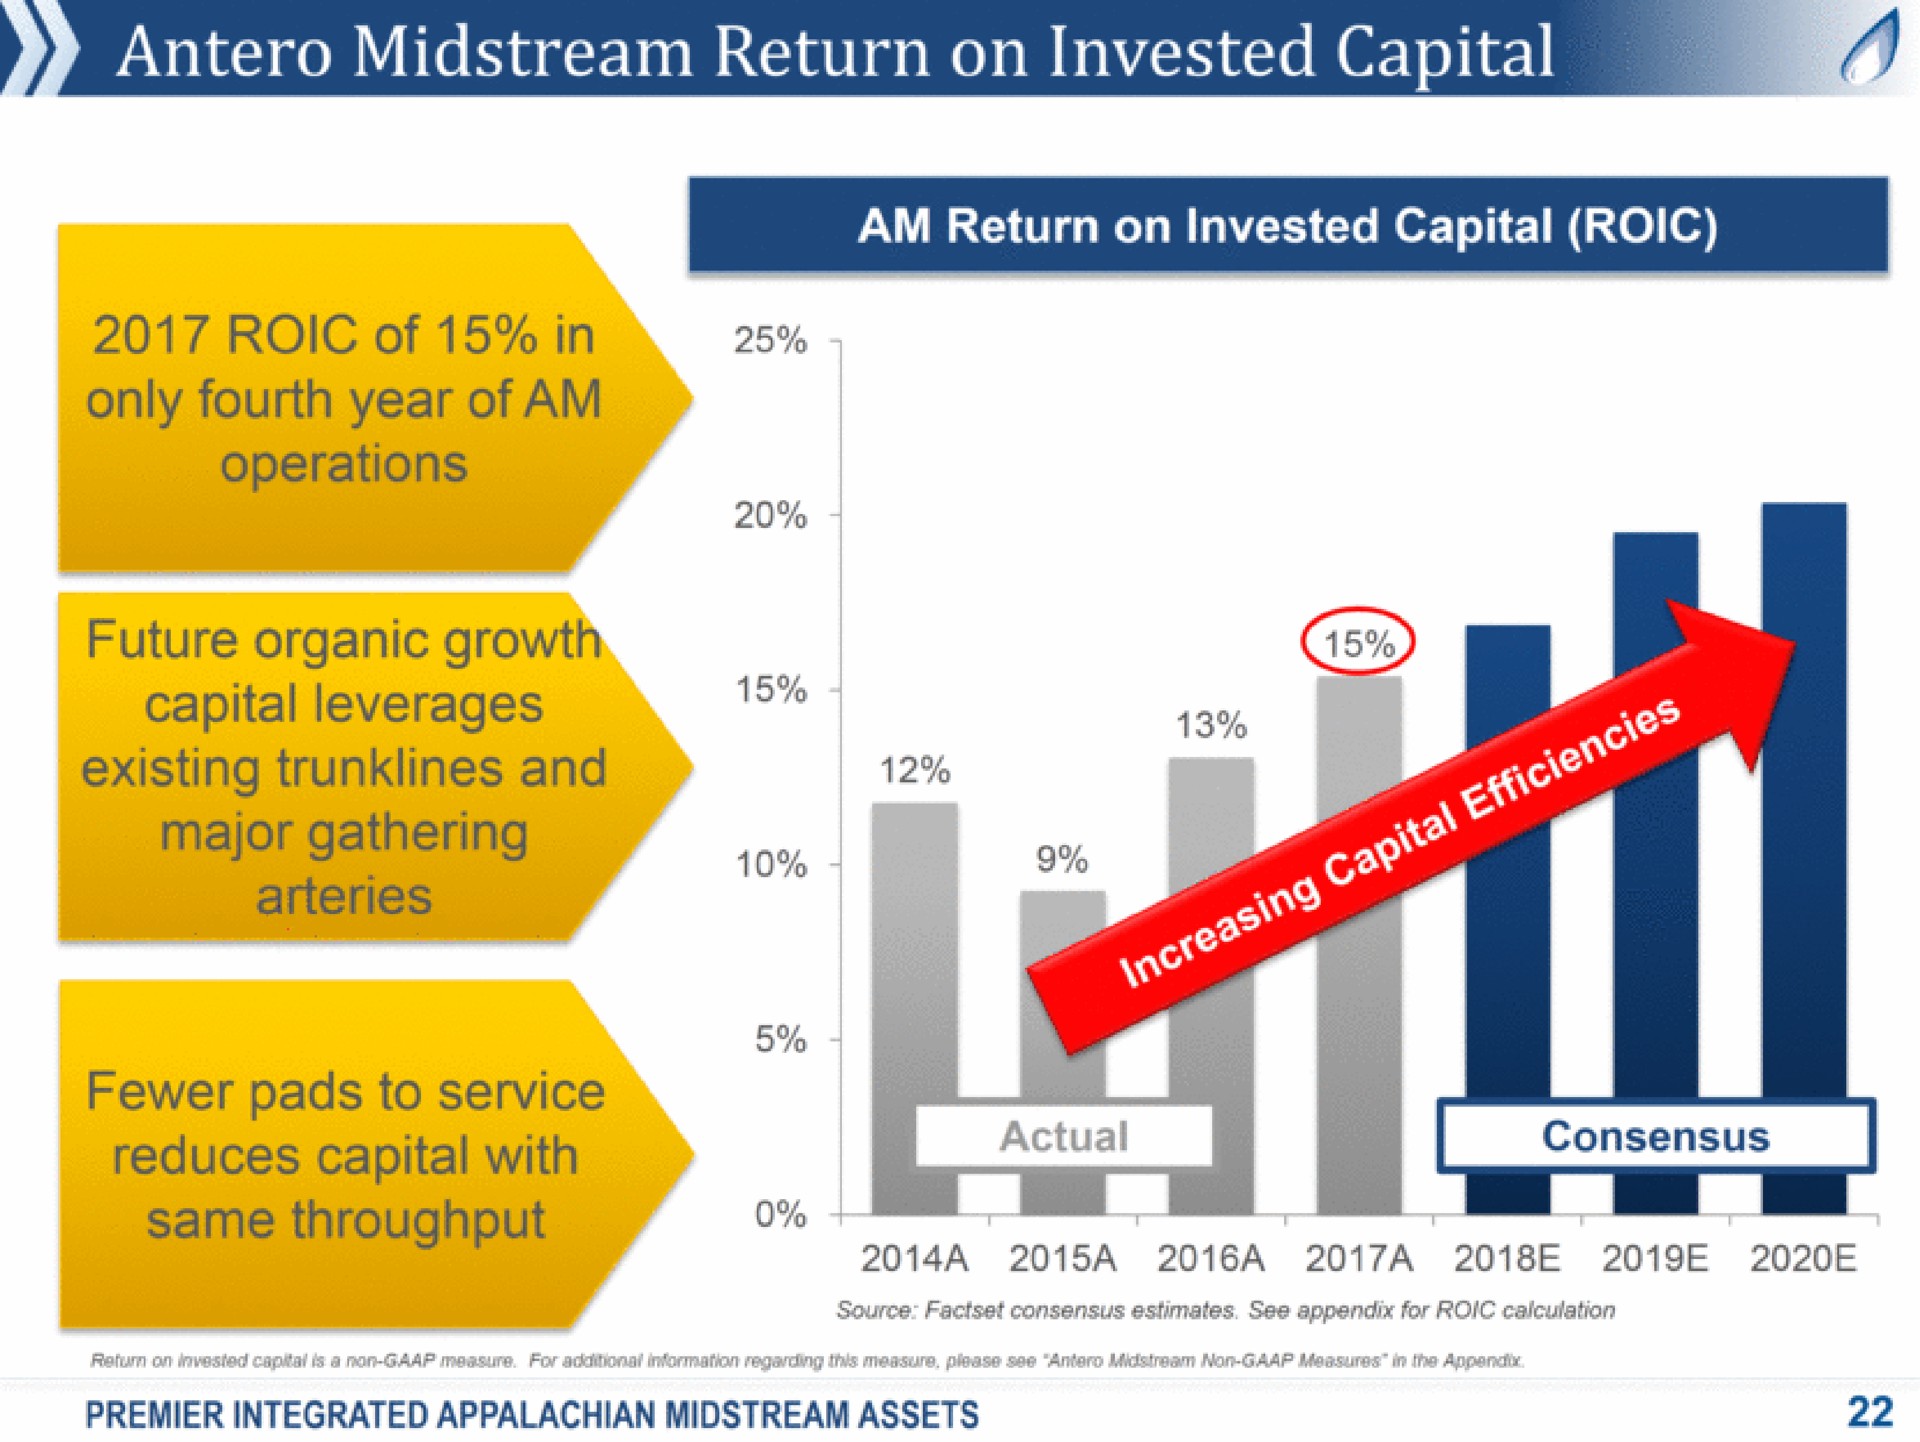 midstream return on invested capital of in lout of am future organic growth capital leverages pads to service consensus | Antero Midstream Partners